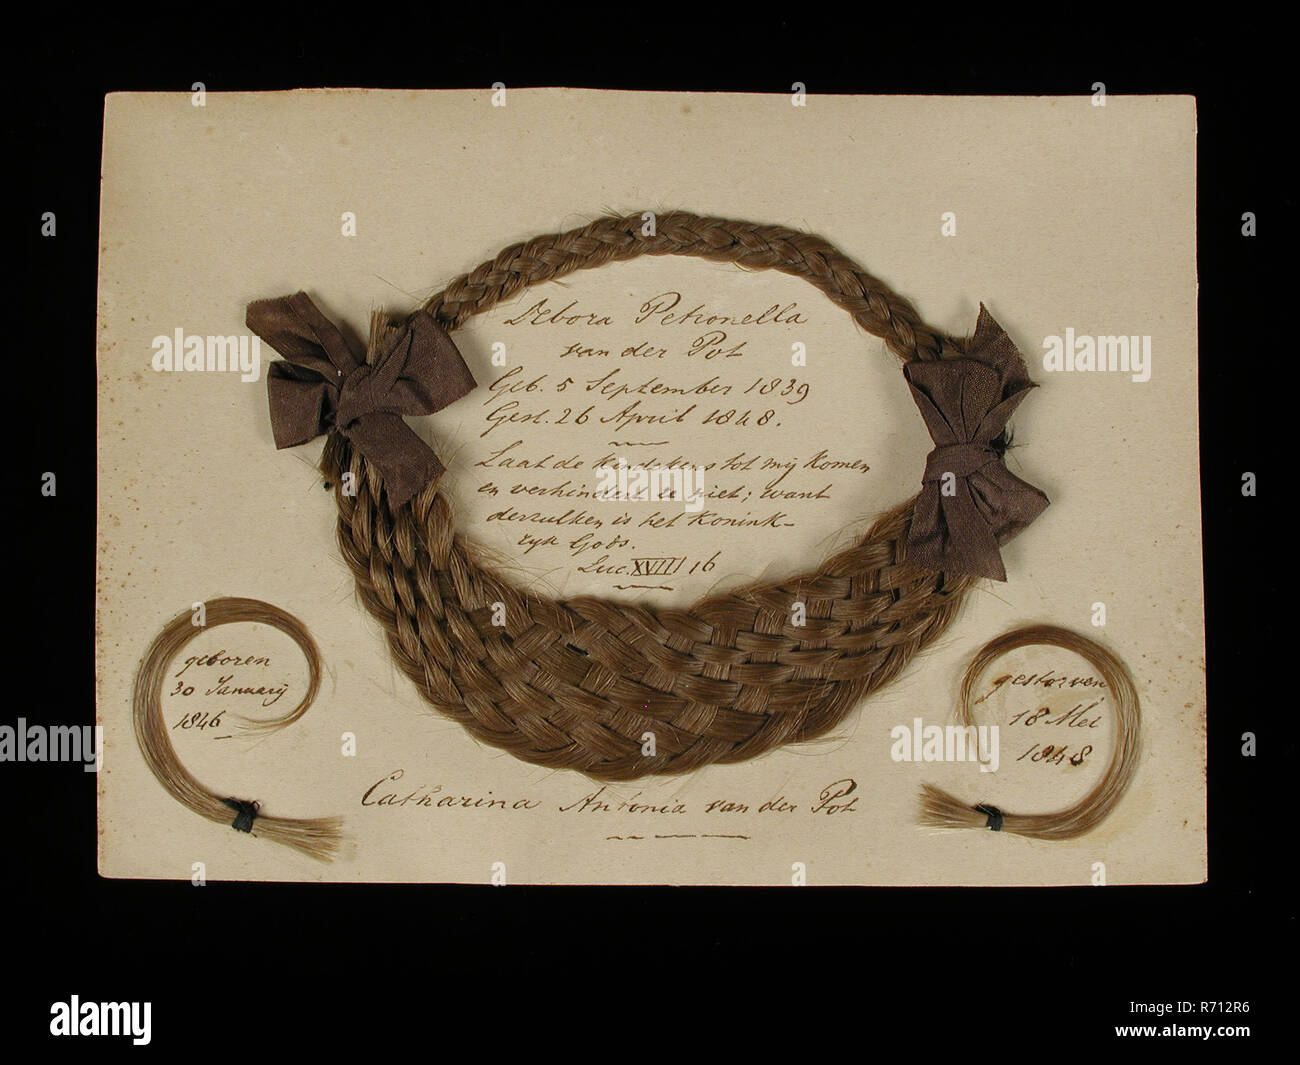 Oval braided hair wreath with inscription, Debora Petronella van der Pot 1848 and Catharina Antonia van der Pot 1848, on the map, hair work her paper ink, Hair piece on white card the size of an envelope an oval braided hair ring that is widest from the bottom and left and right is held by dark bow in it text text inside the envelope hair wreath: Debora Petronella van der Pot Geb. 5 September 1839 Gest. April 26, 1848 Let the little children come to me and do not prevent; for such is the Kingdom of God Lac XVIII 16 left at the bottom of her curl: born January 30, 1846 remembrance memorial deat Stock Photo